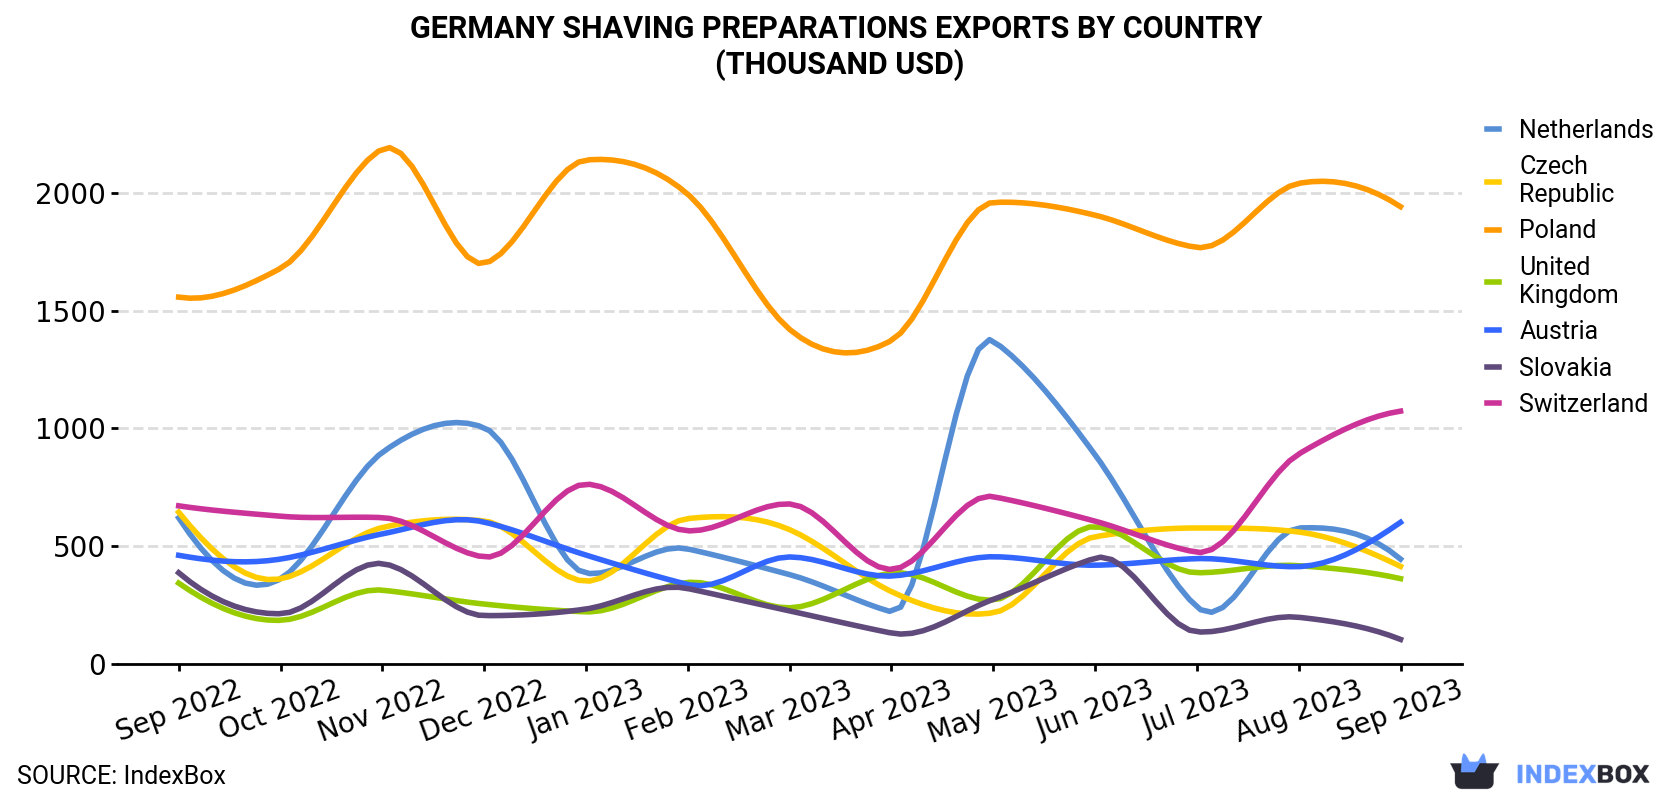 Germany Shaving Preparations Exports By Country (Thousand USD)